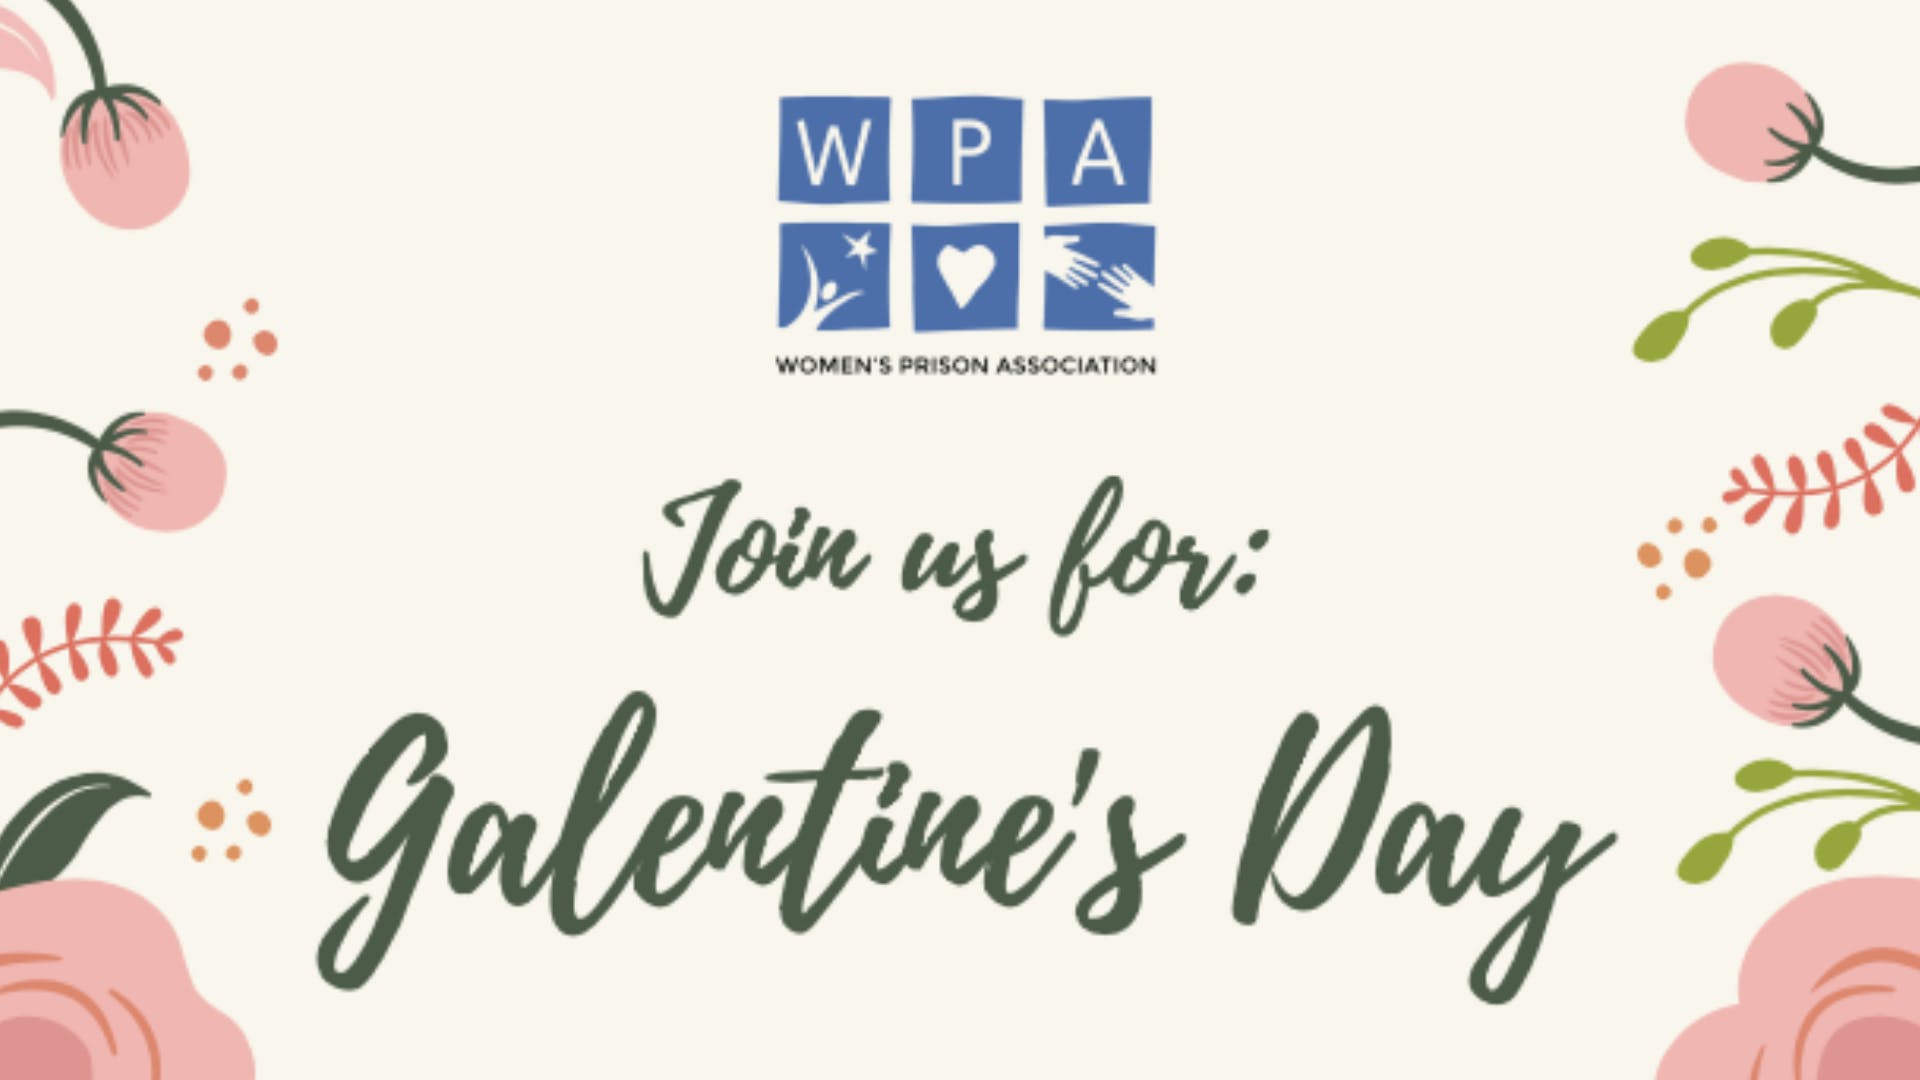 Galentine's Day with WPA FEB 2019